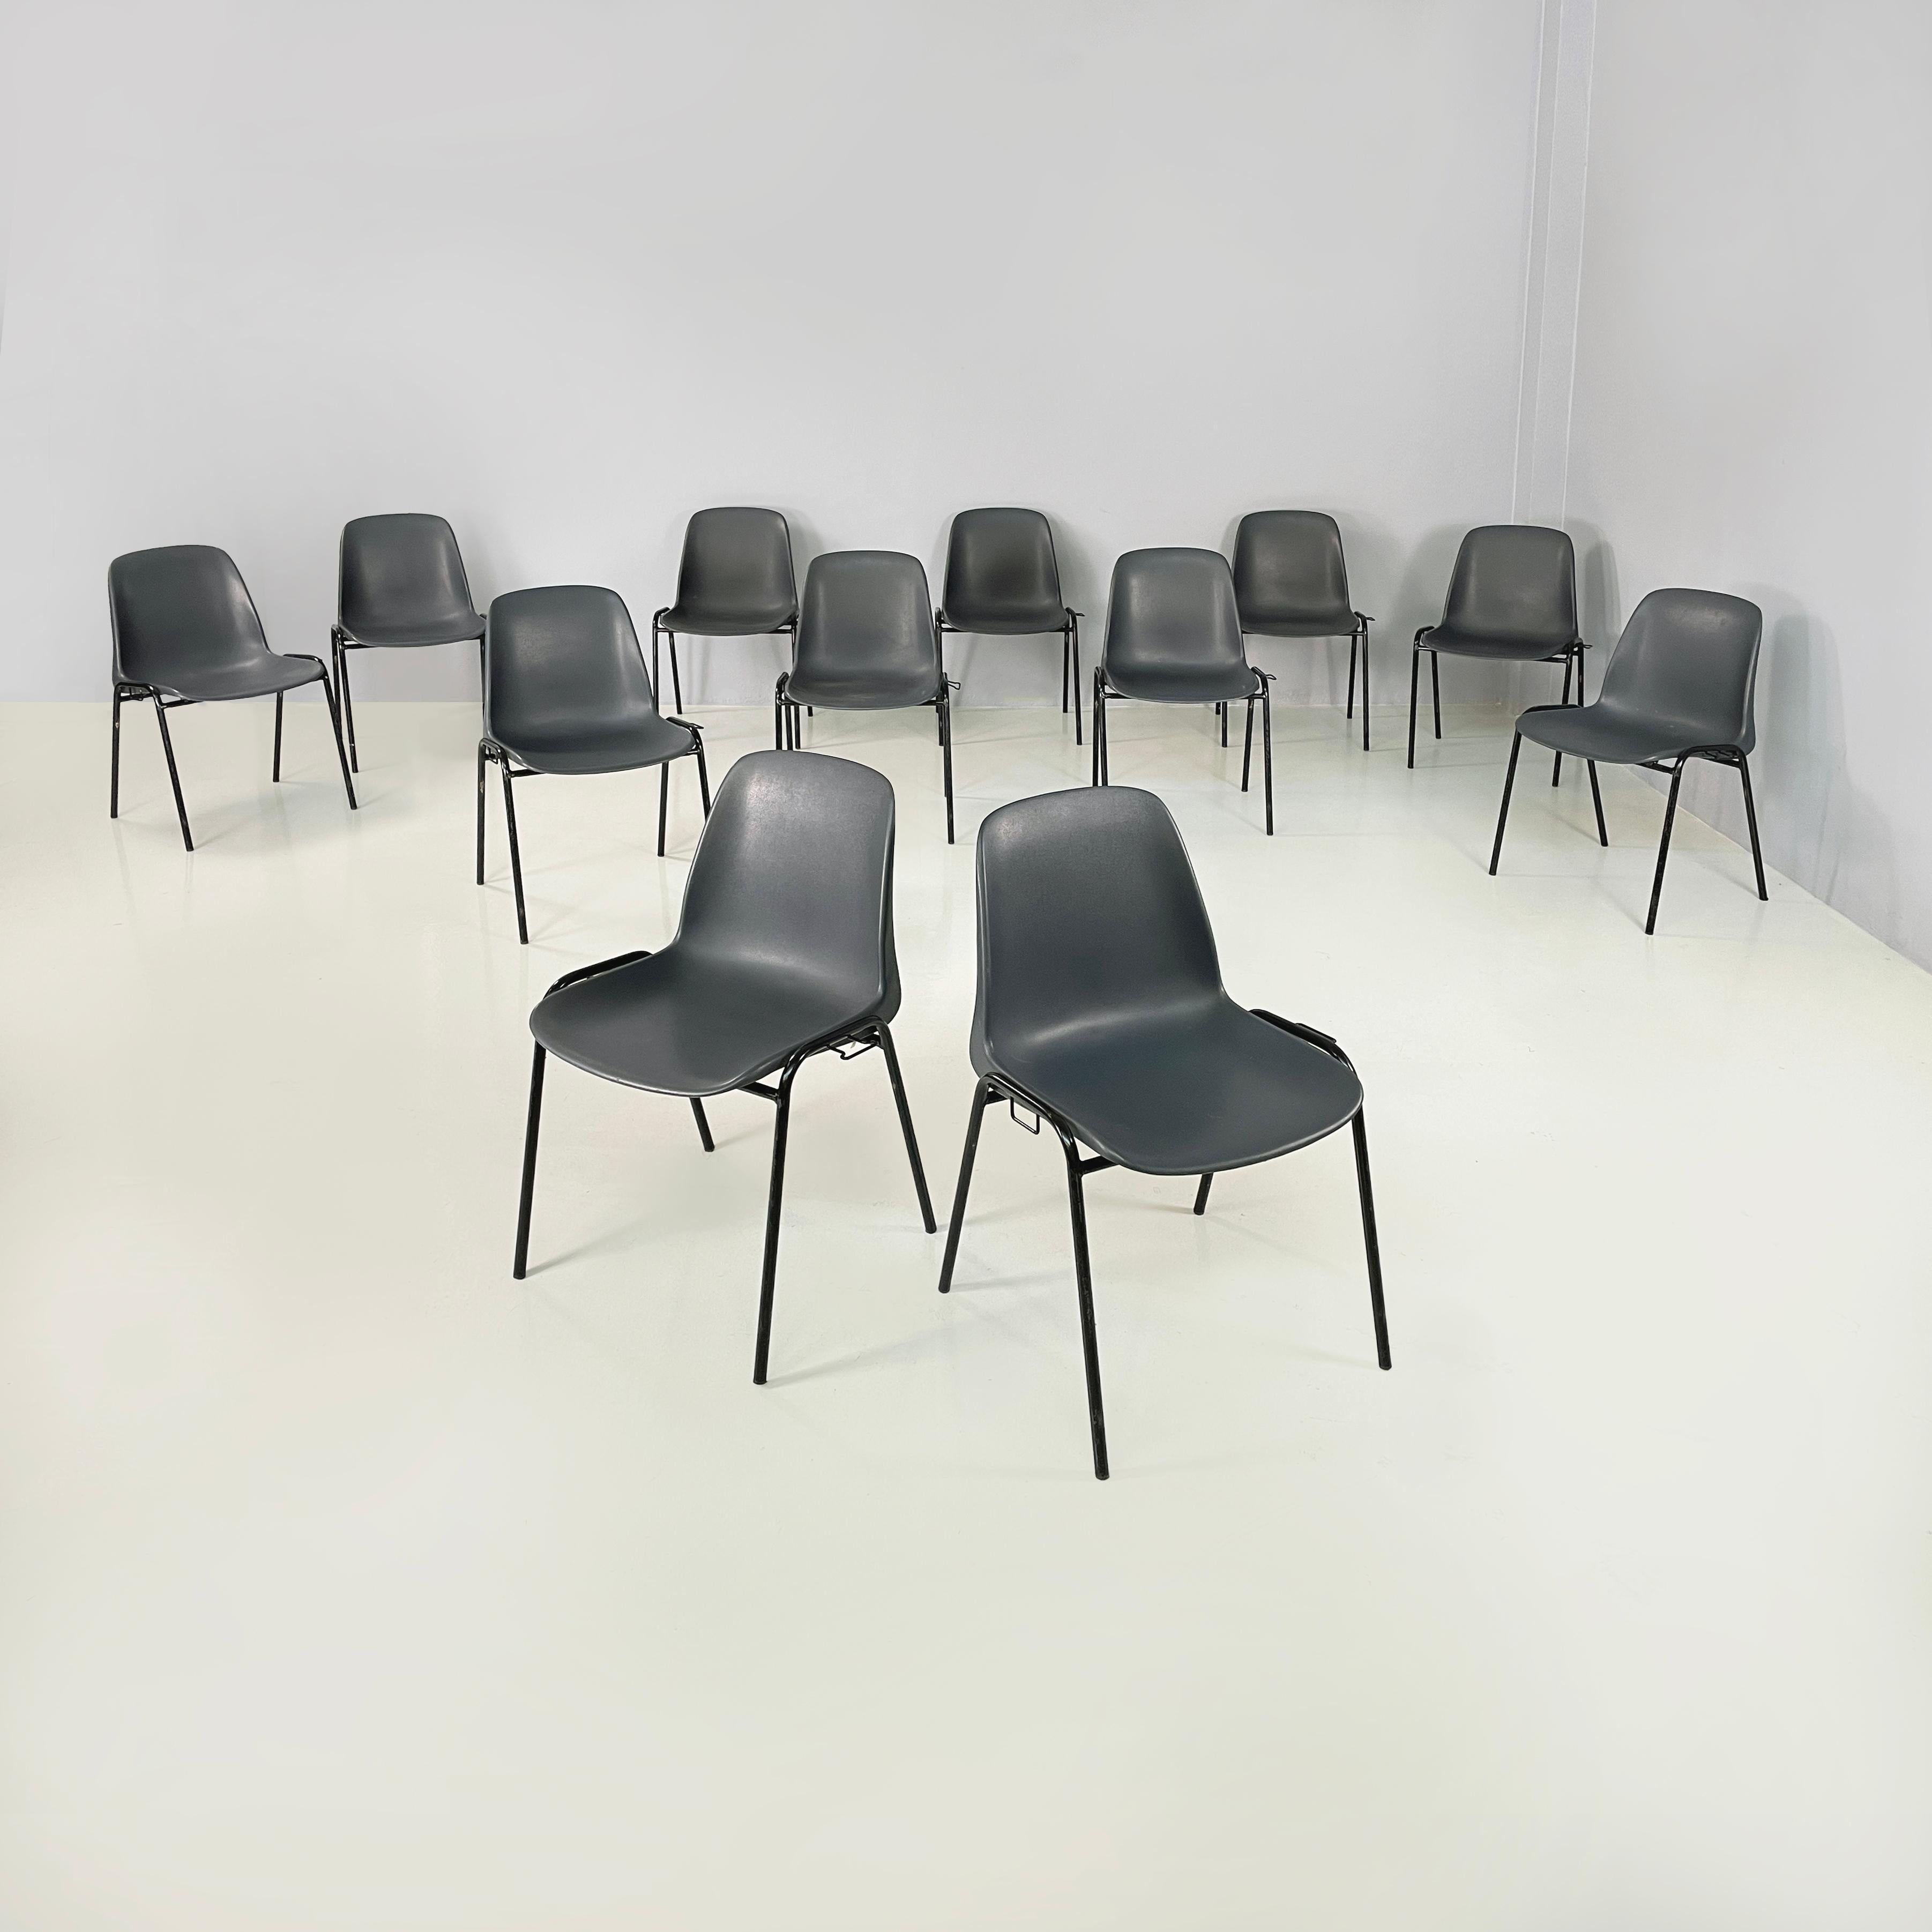 Italian modern Stackable chairs in gray plastic and black metal, 2000s
Set of 12 chairs with curved monocoque in gray plastic. The legs are made of black painted metal rod.On the two sides there are black painted metal rod parts that allow the